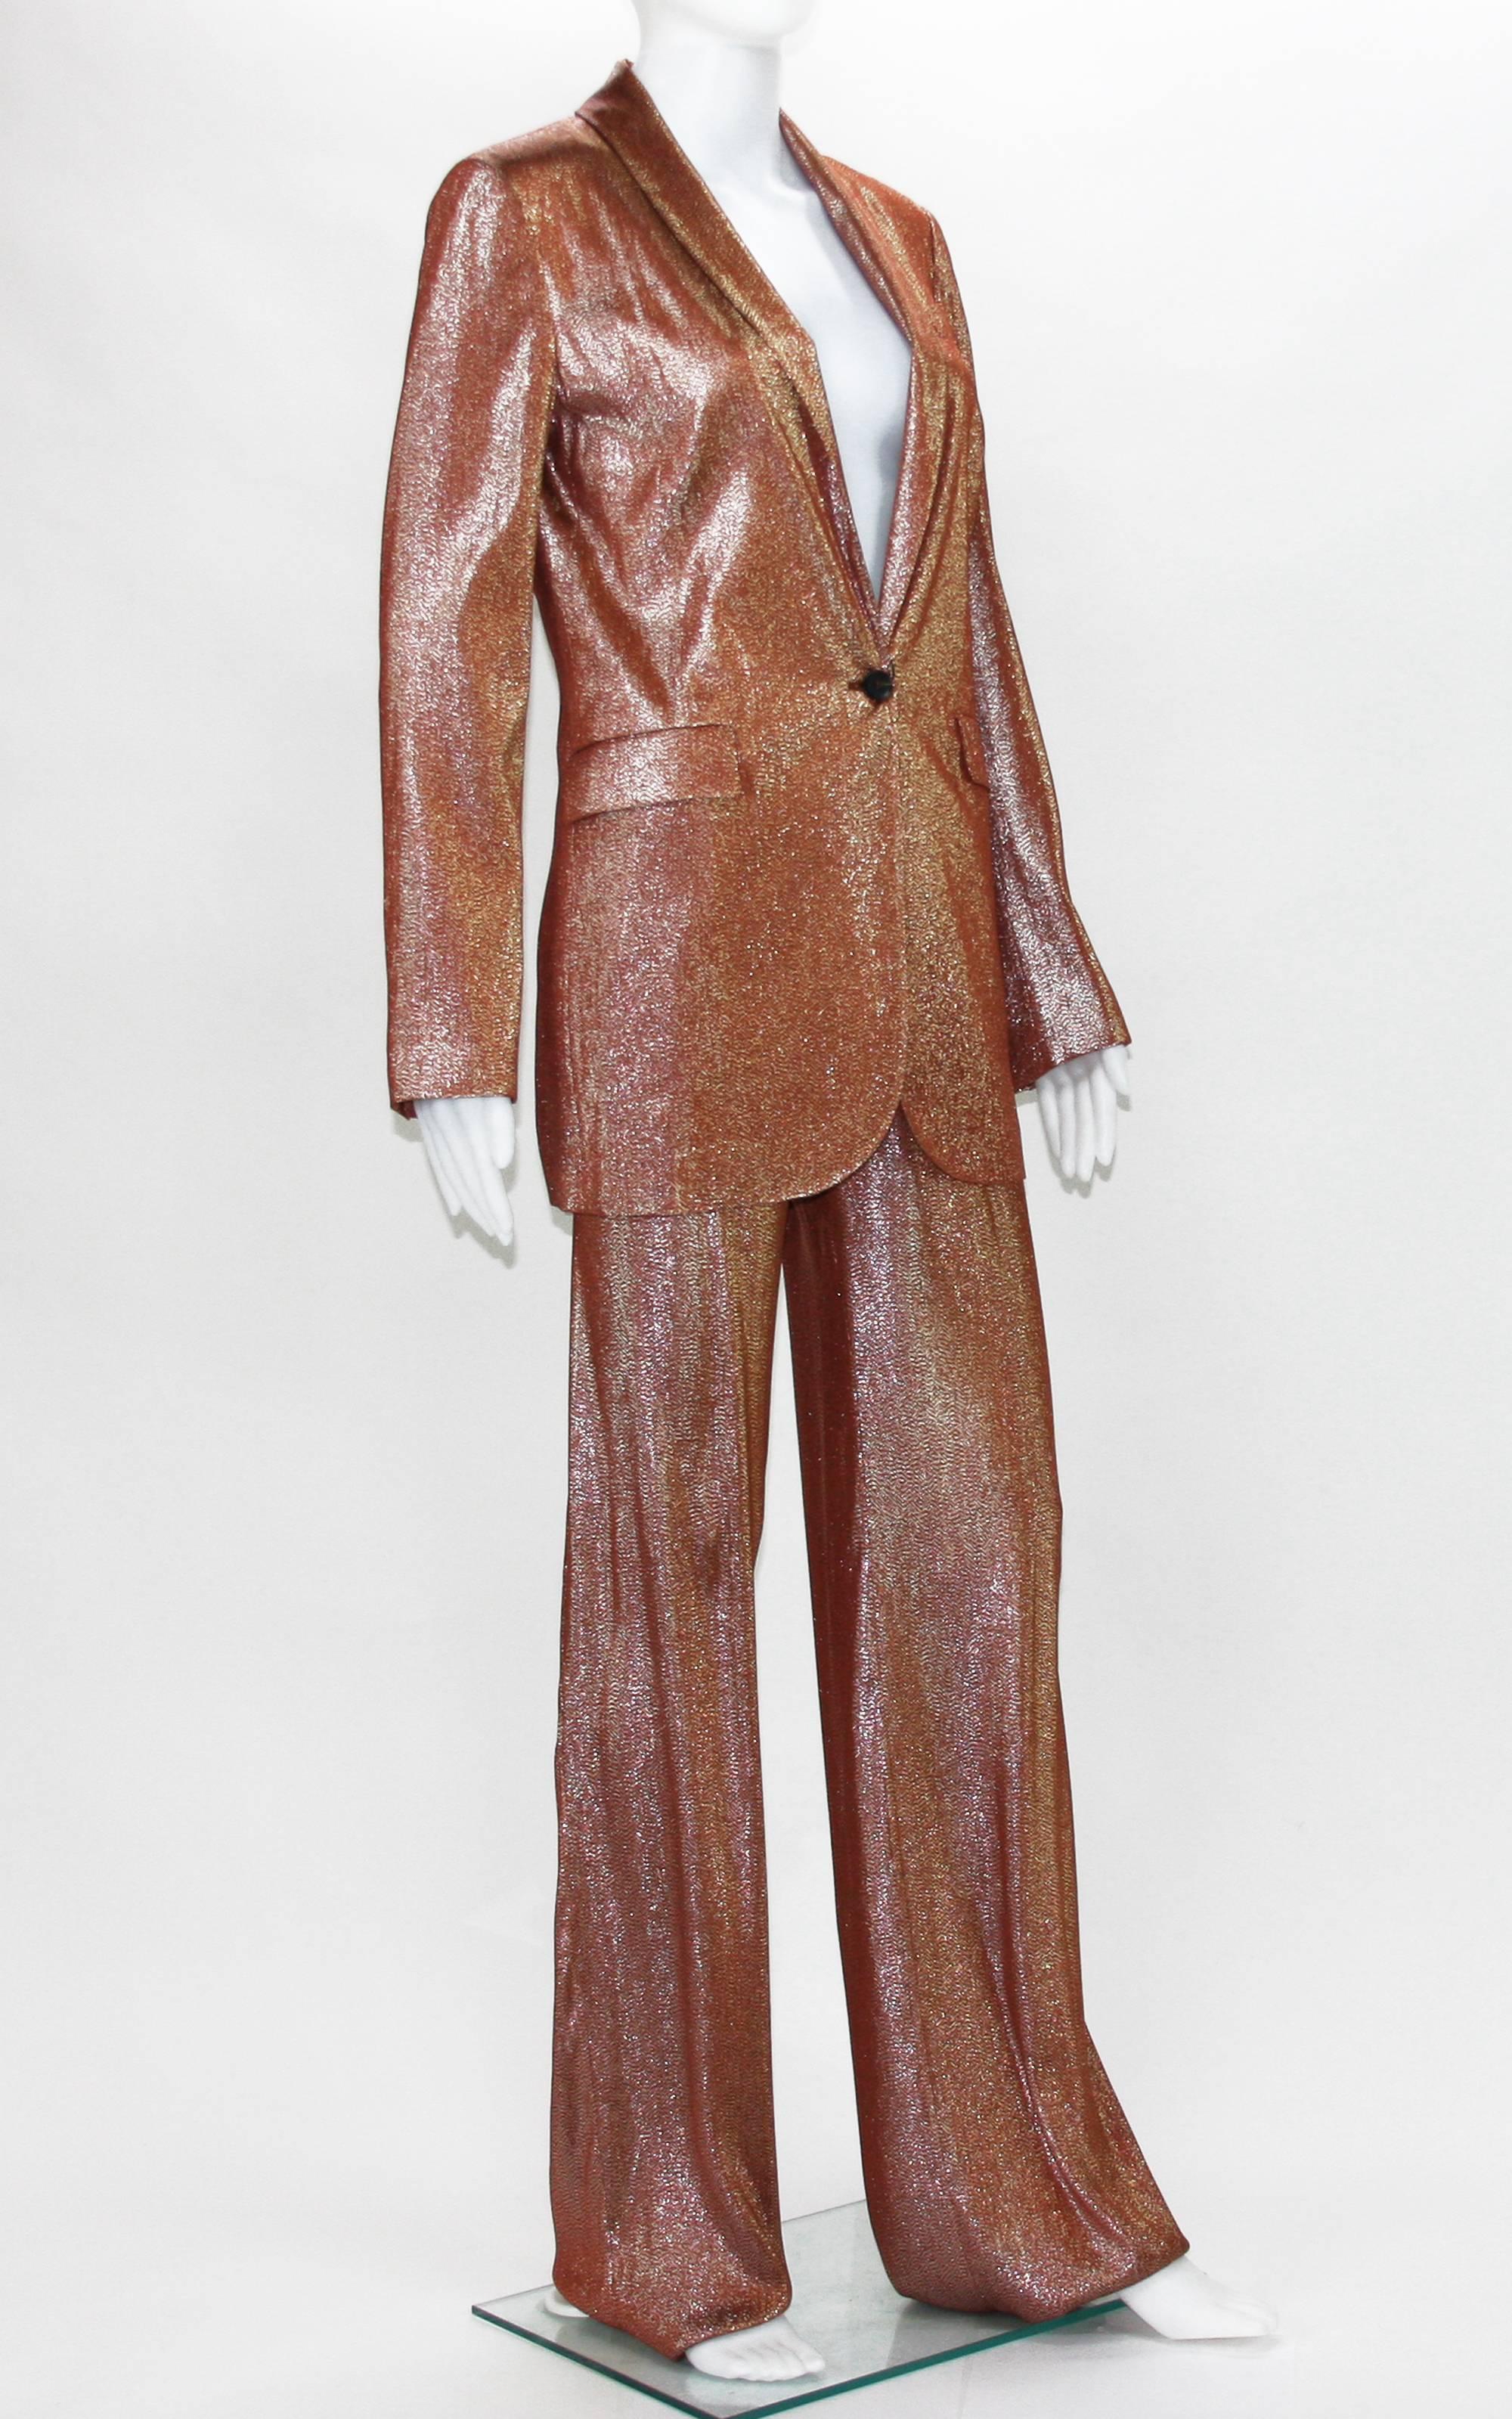 New Runway GUCCI Suit Iridescent Rust Liquid Lame Jacket & Pants sizes 38 and 40 1